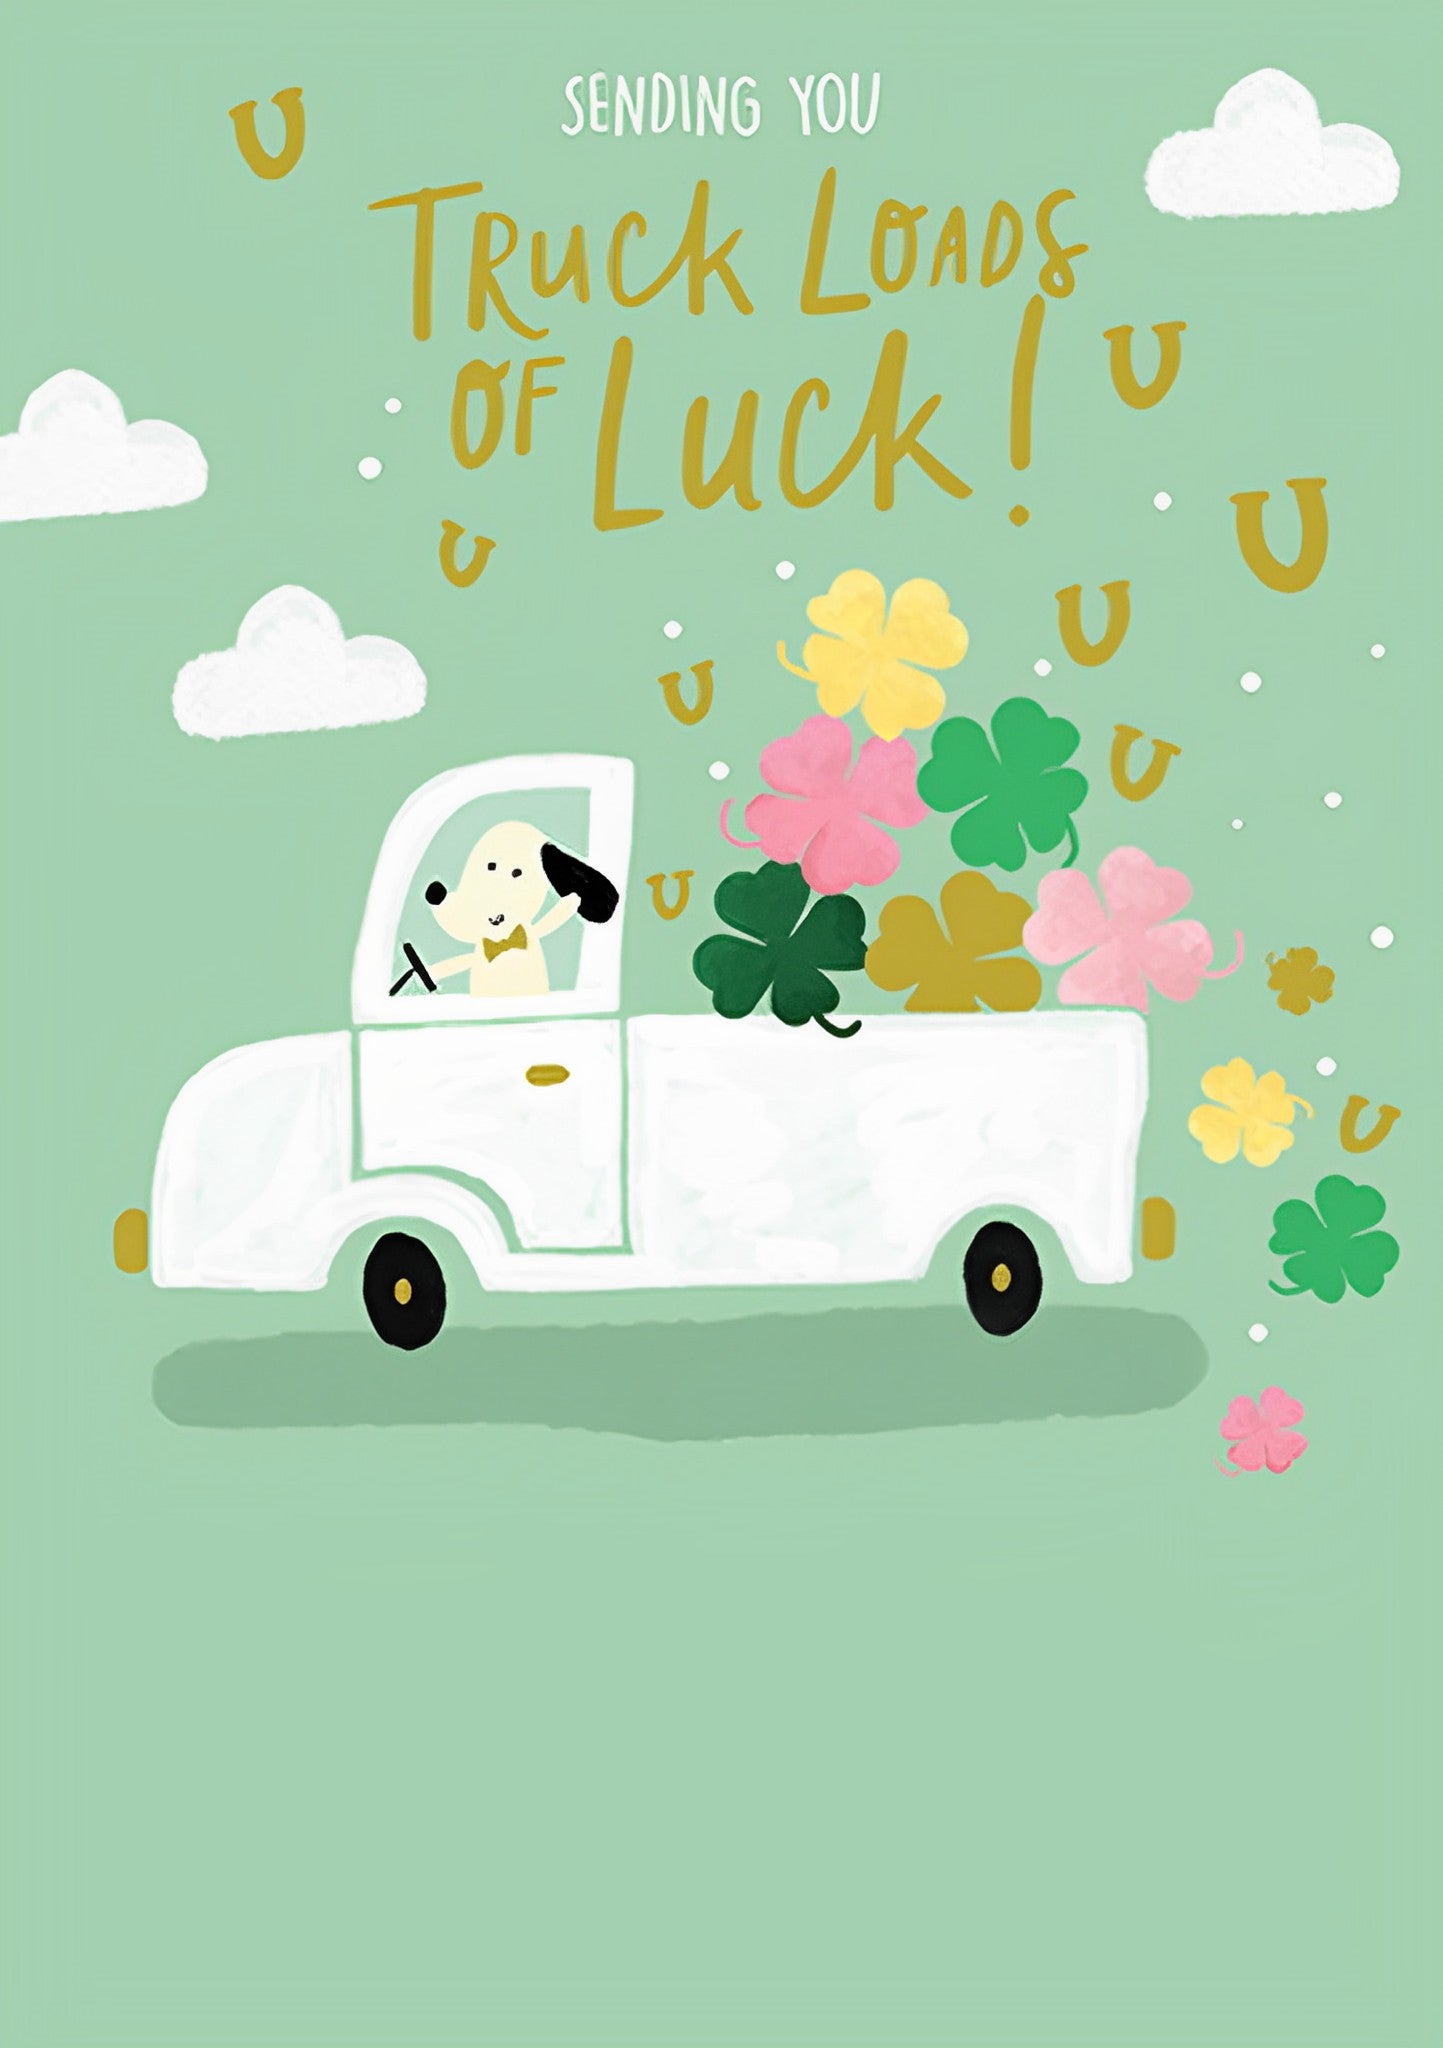 Truck Loads Of Luck Card from Penny Black